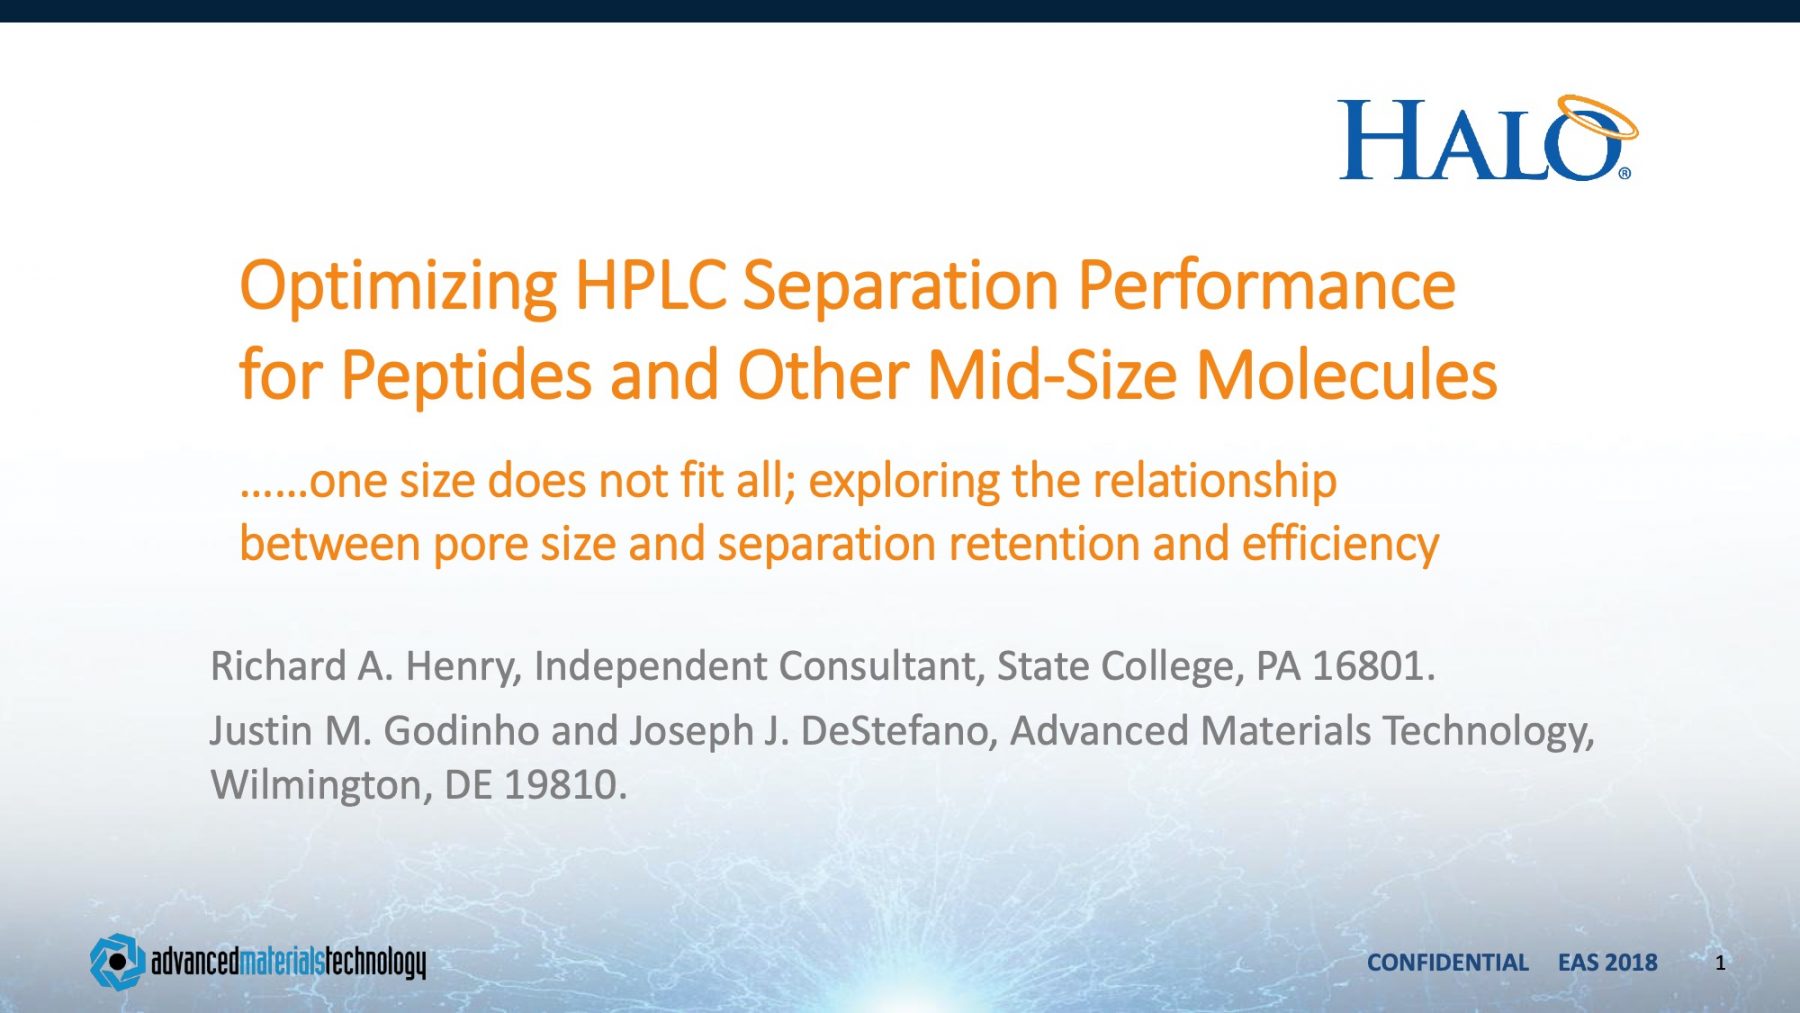 optimizing hplc separation performance for peptides and other mid-size molecules